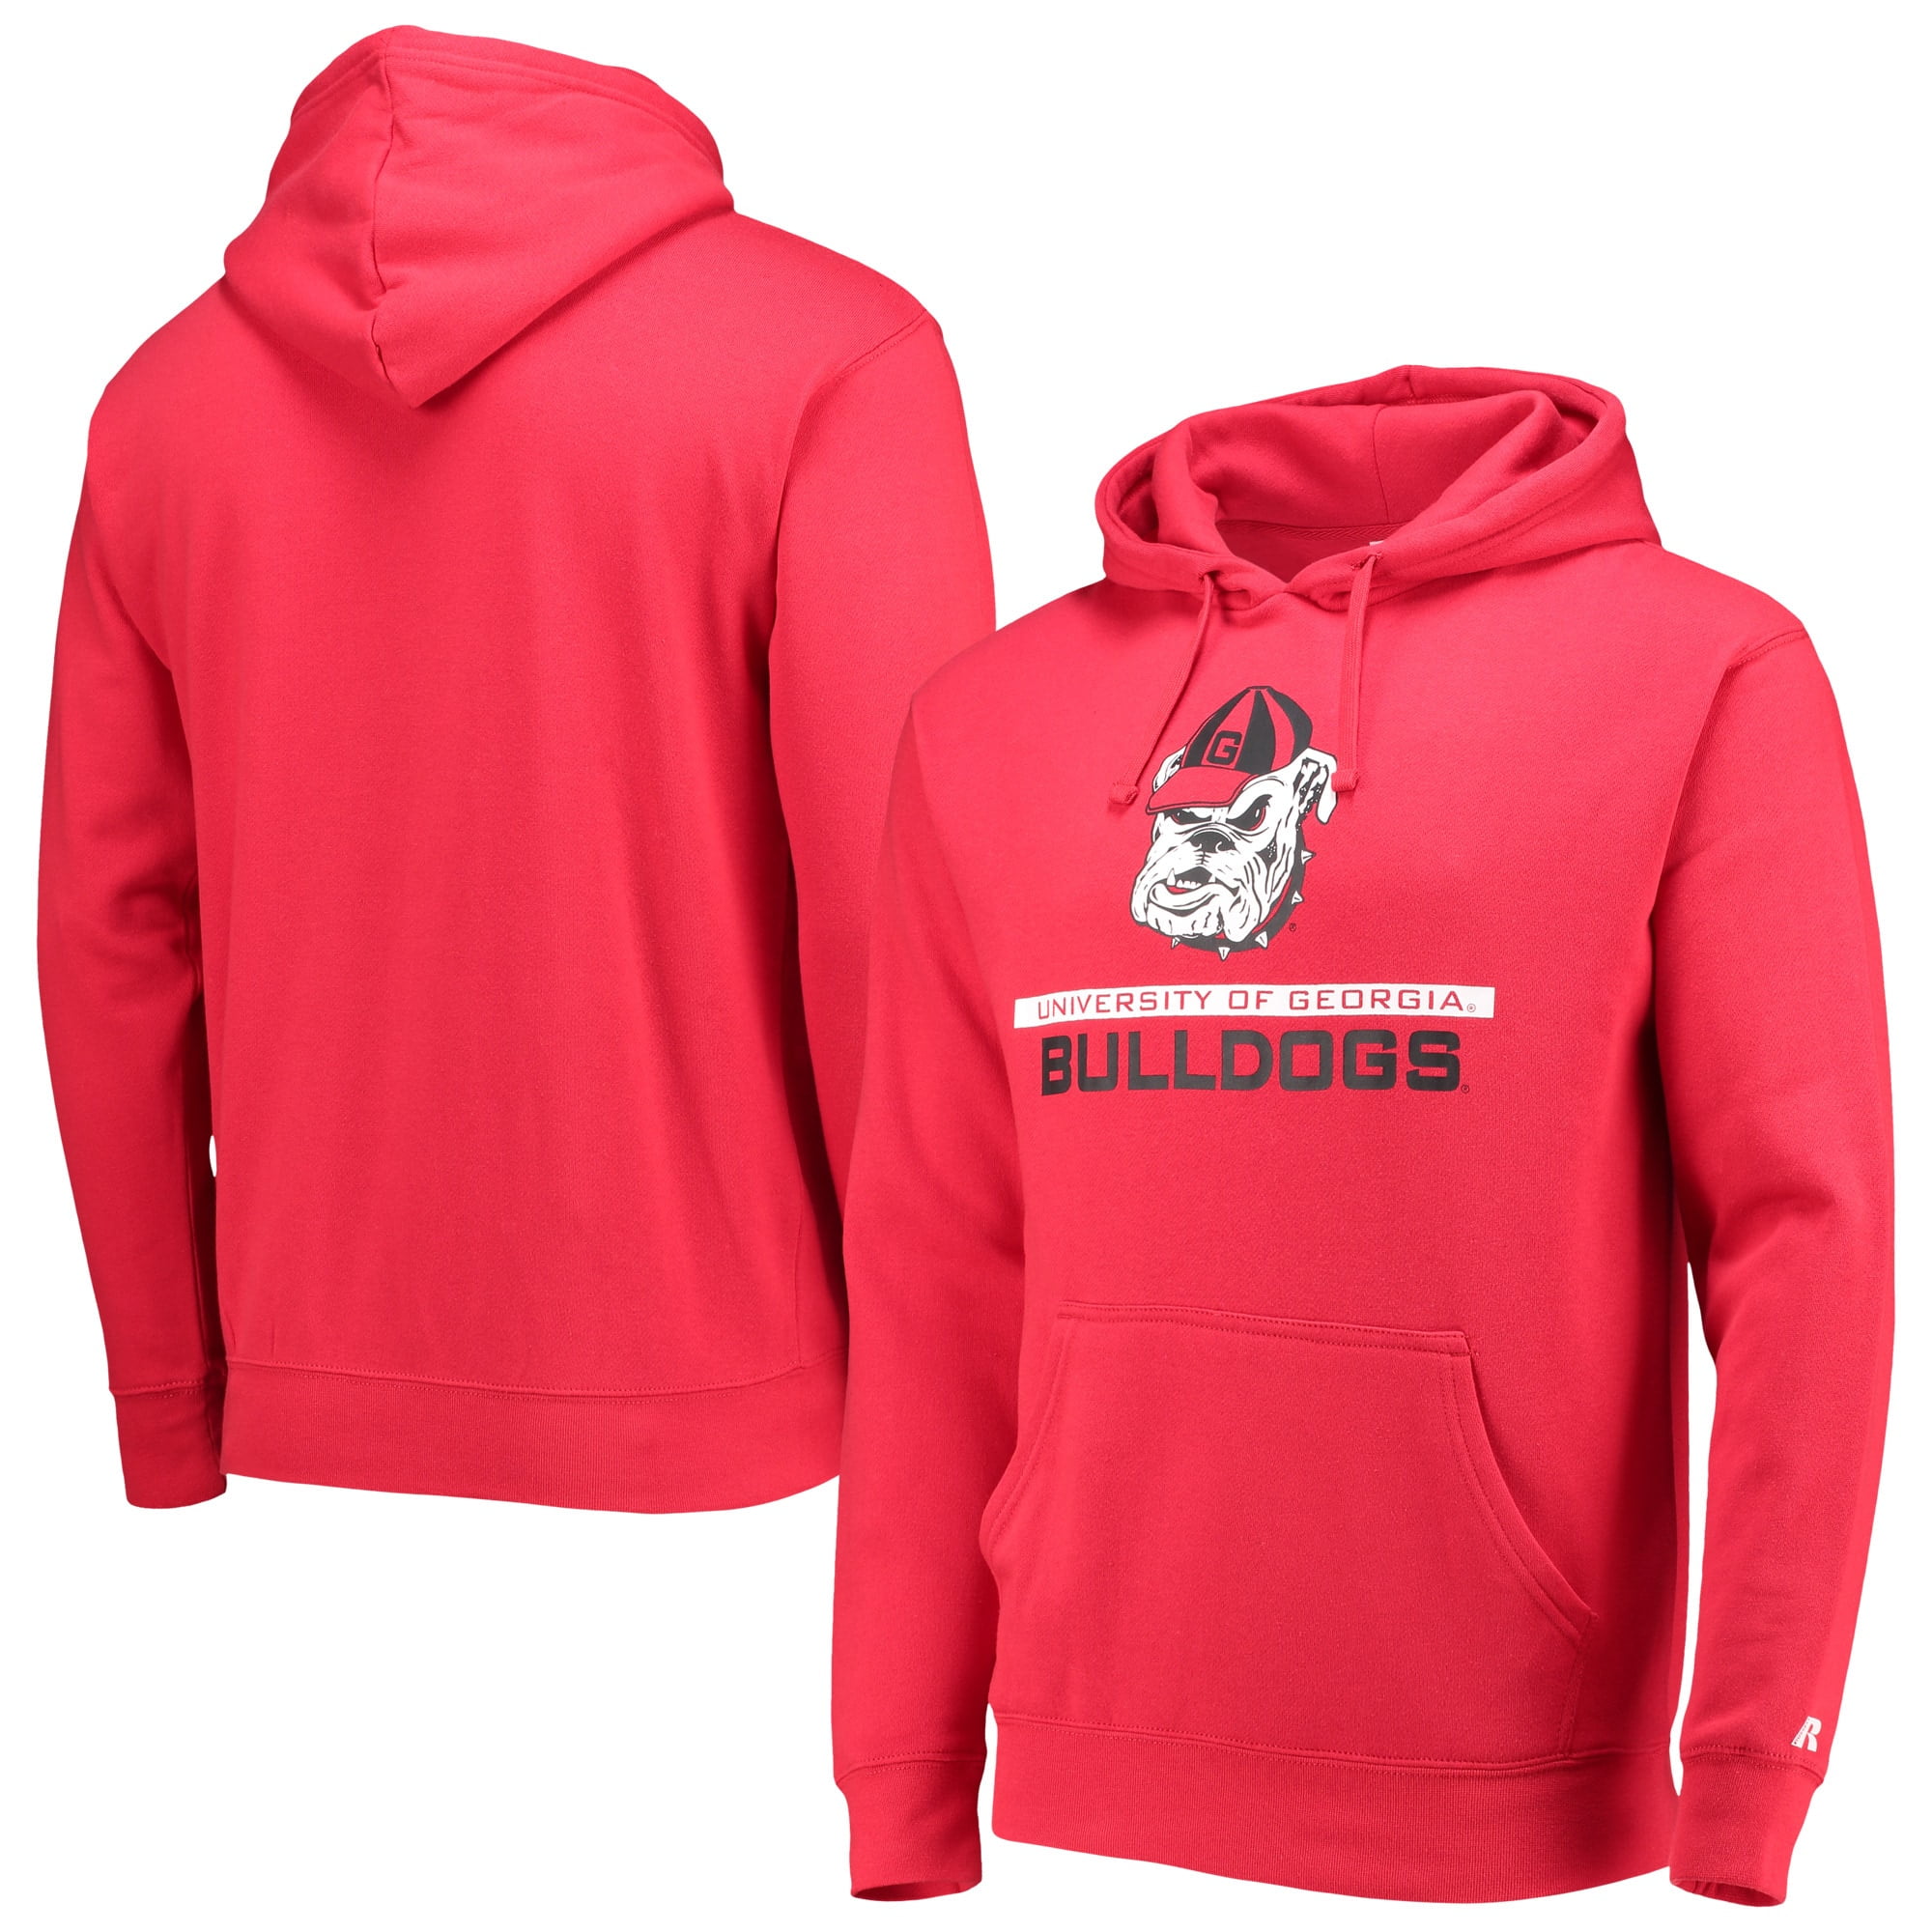 NEW Georgia Bulldogs Football Mens Adult SIZE S Small Hoodie by Majestic 